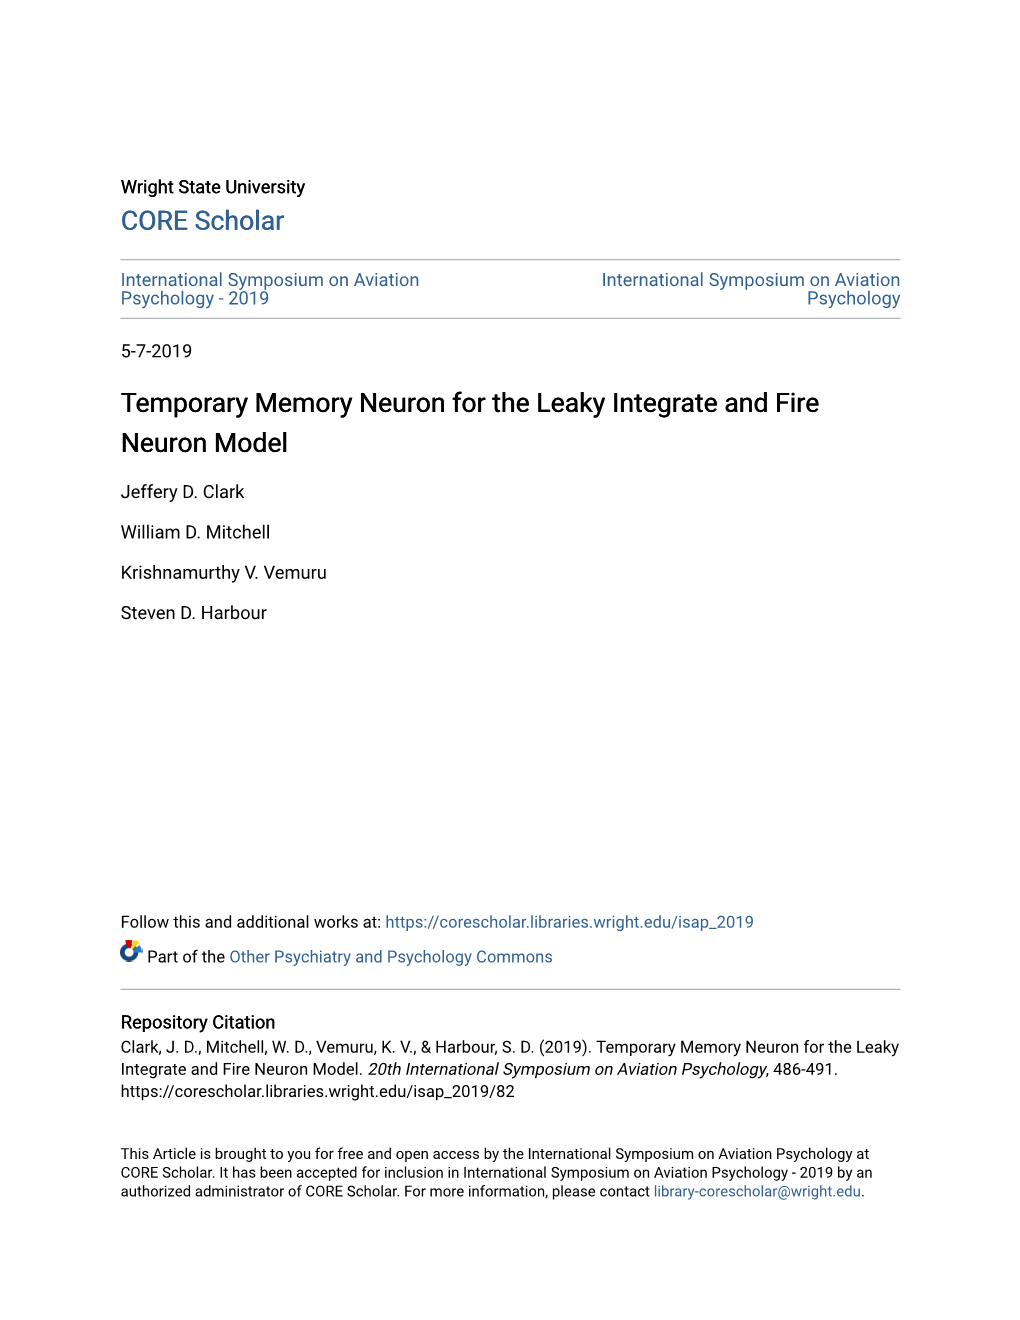 Temporary Memory Neuron for the Leaky Integrate and Fire Neuron Model